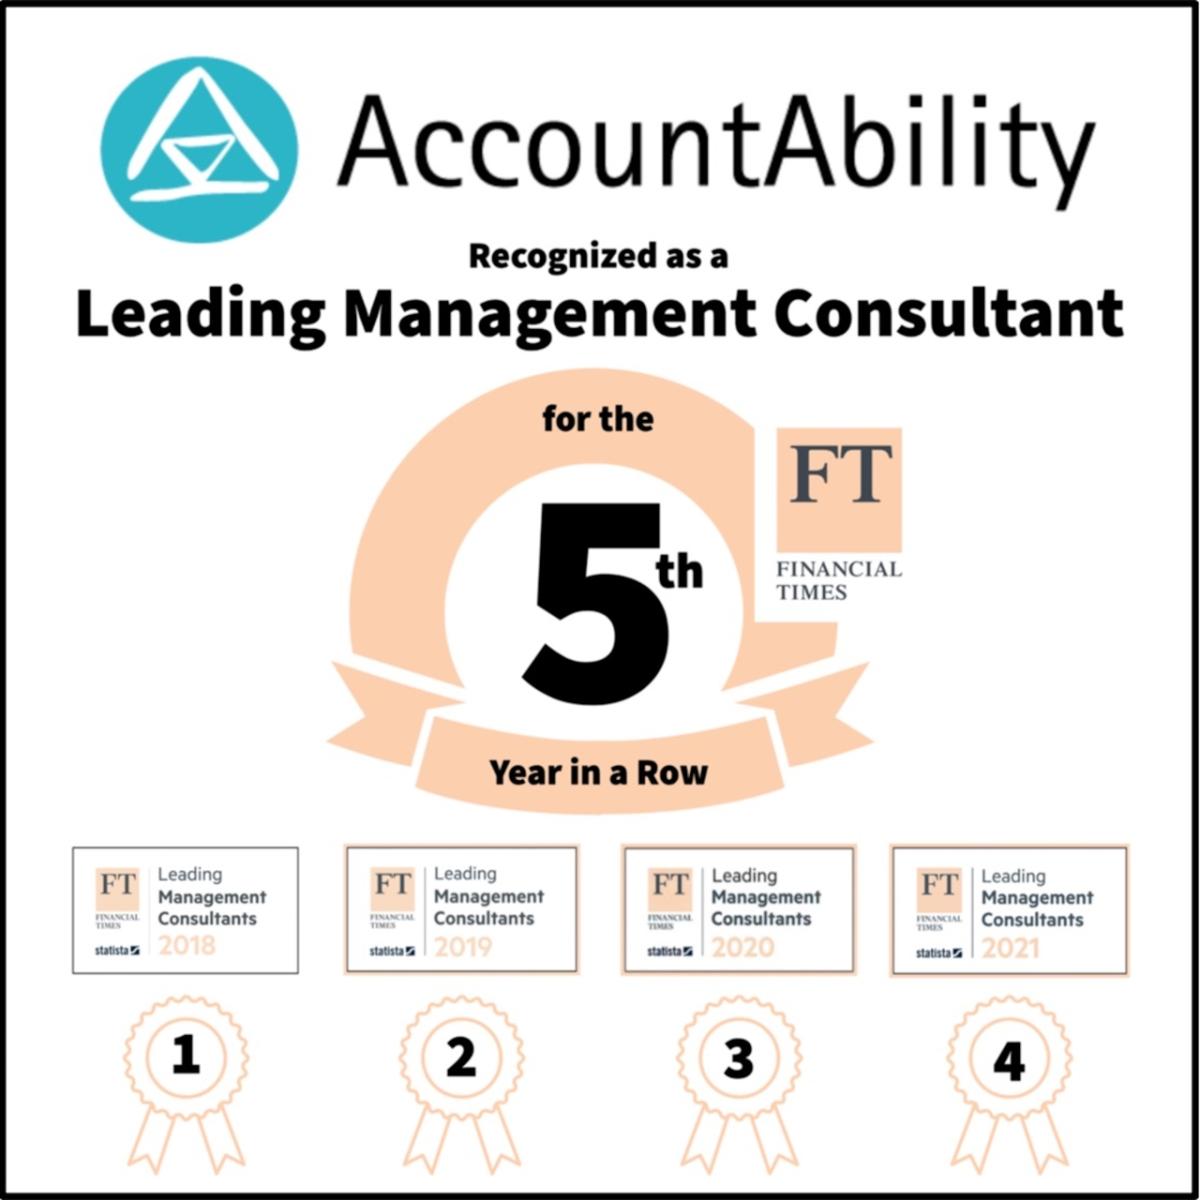 The Financial Times Recognizes AccountAbility as a Leading Management Consultant for the 5th Year in a Row